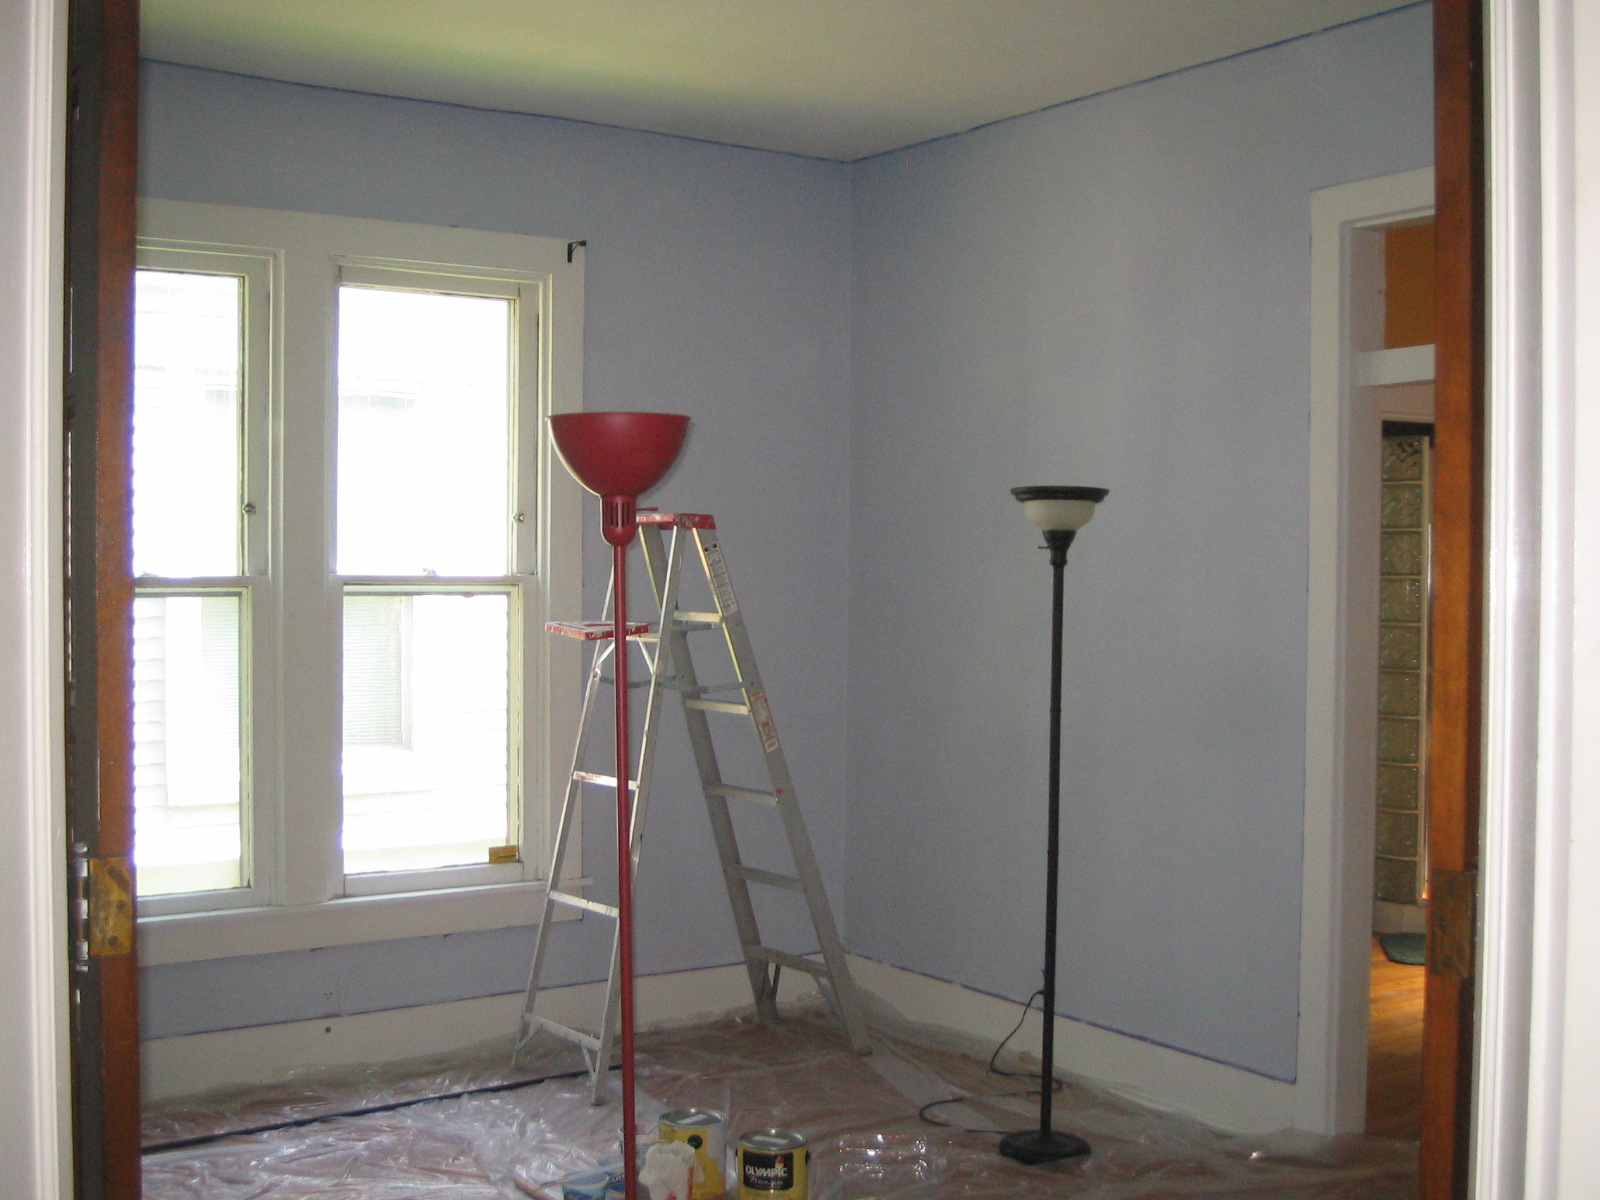 Dining room with first coat